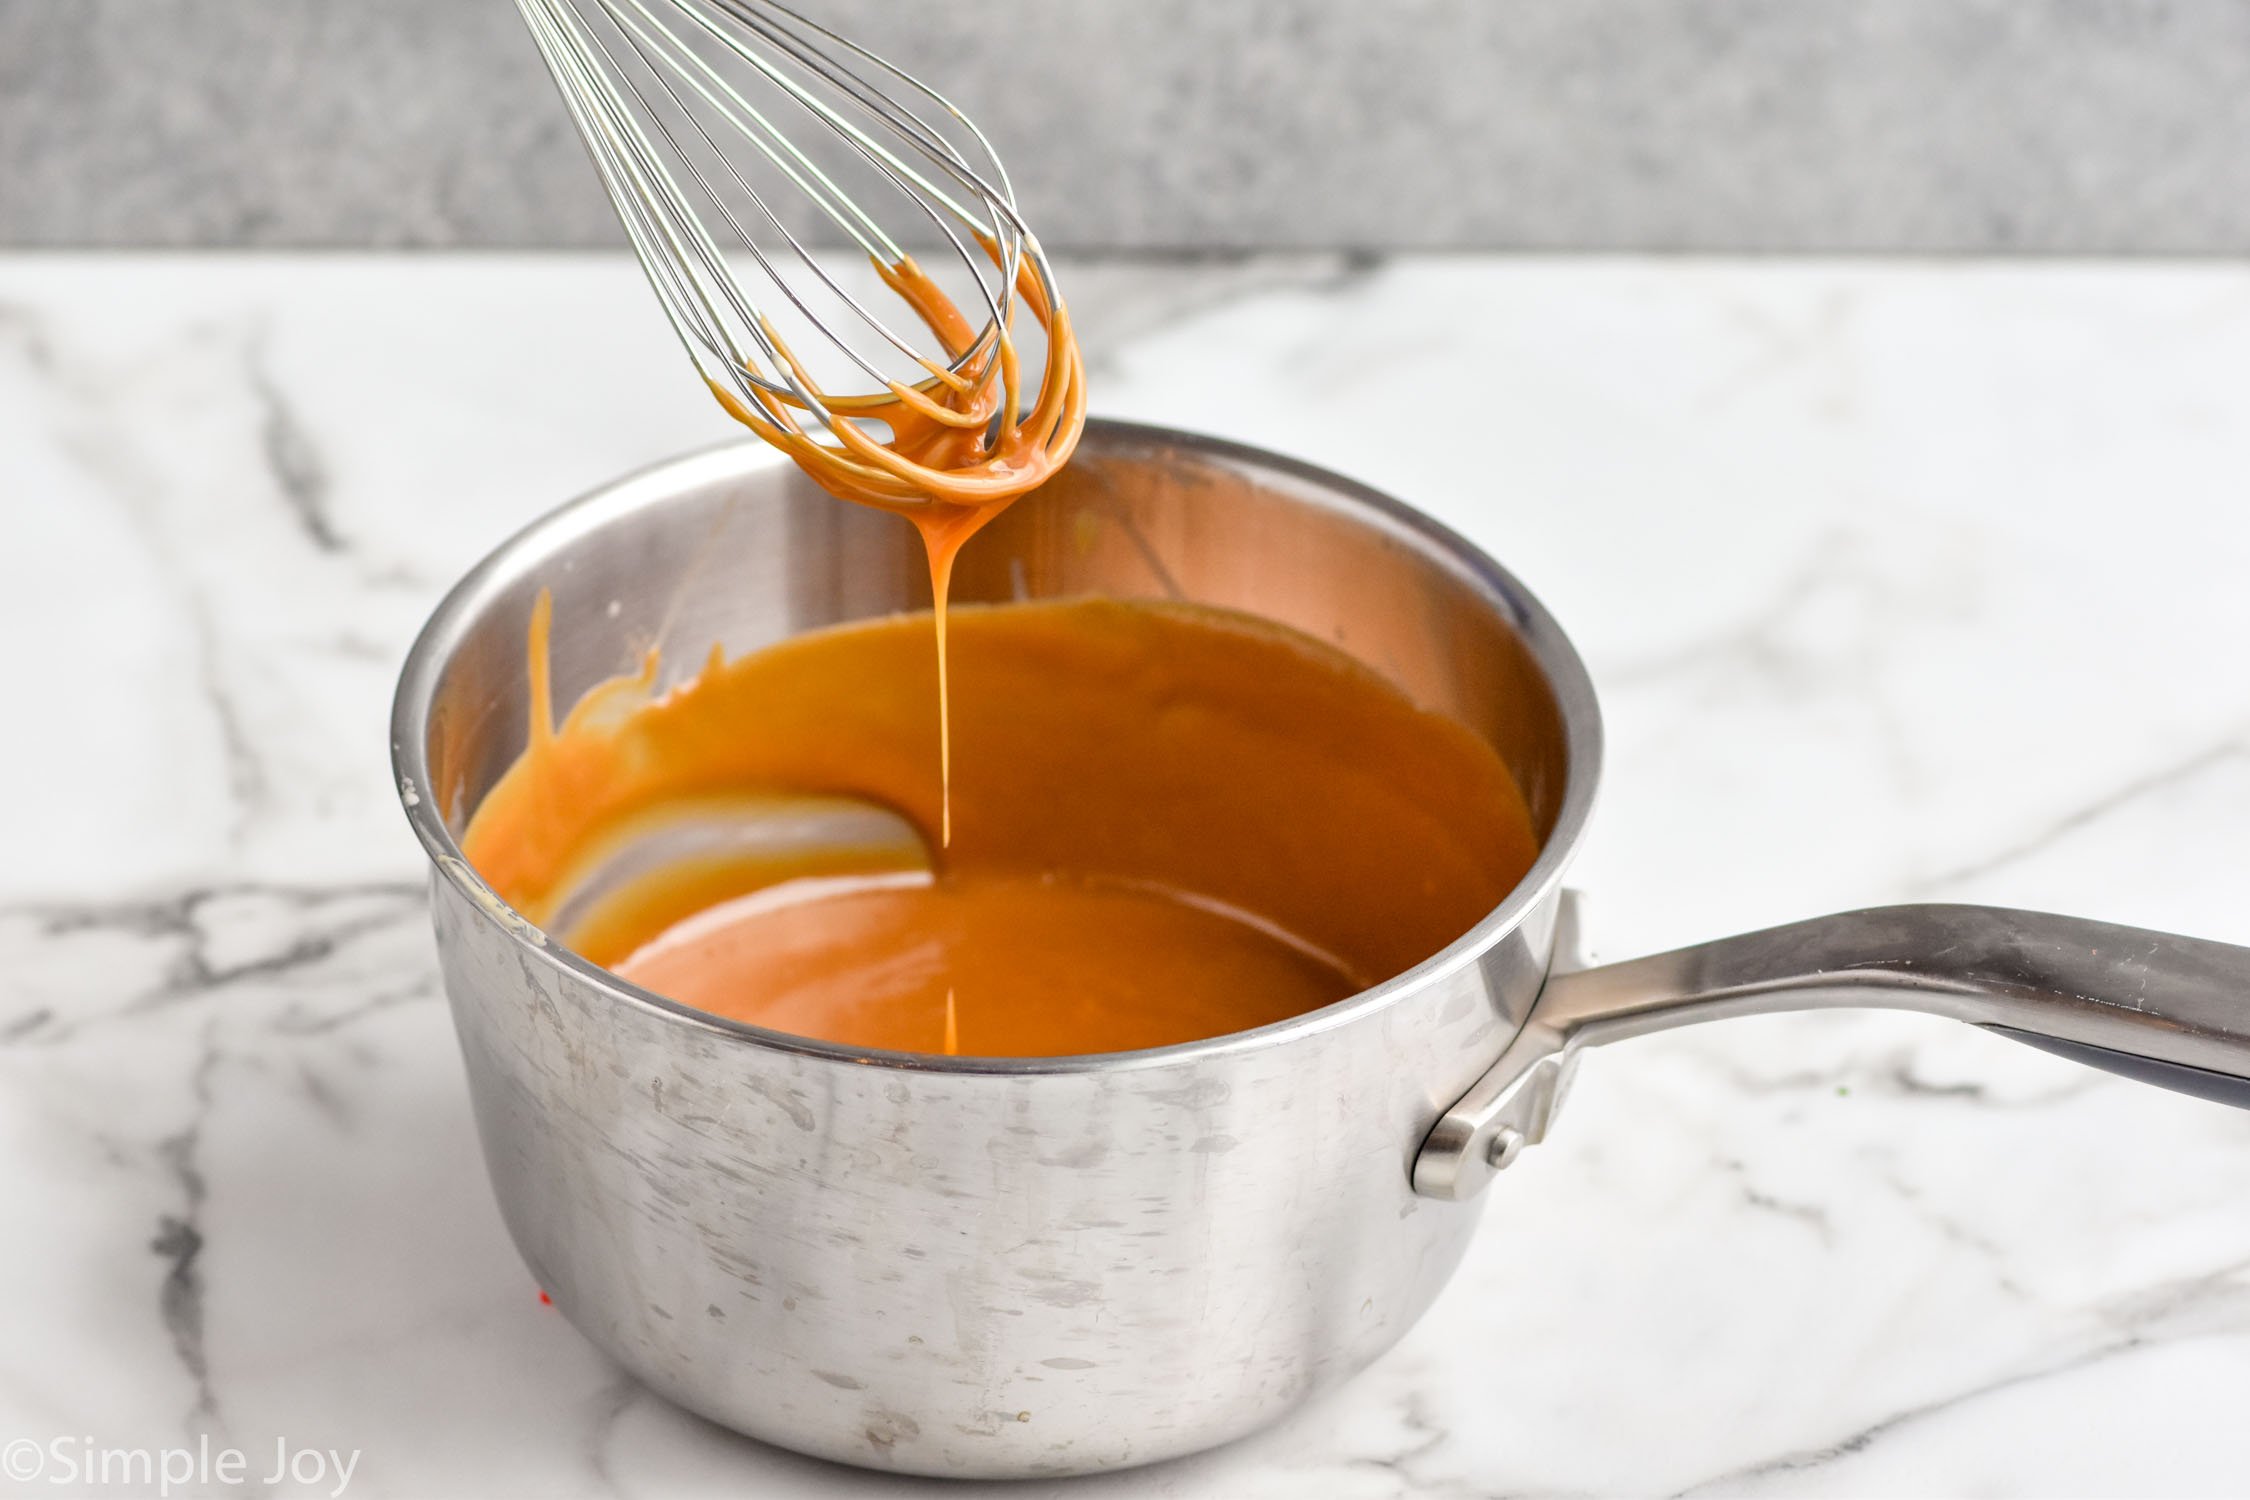 saucepan of caramel sauce for caramel brownies recipe with whisk for mixing